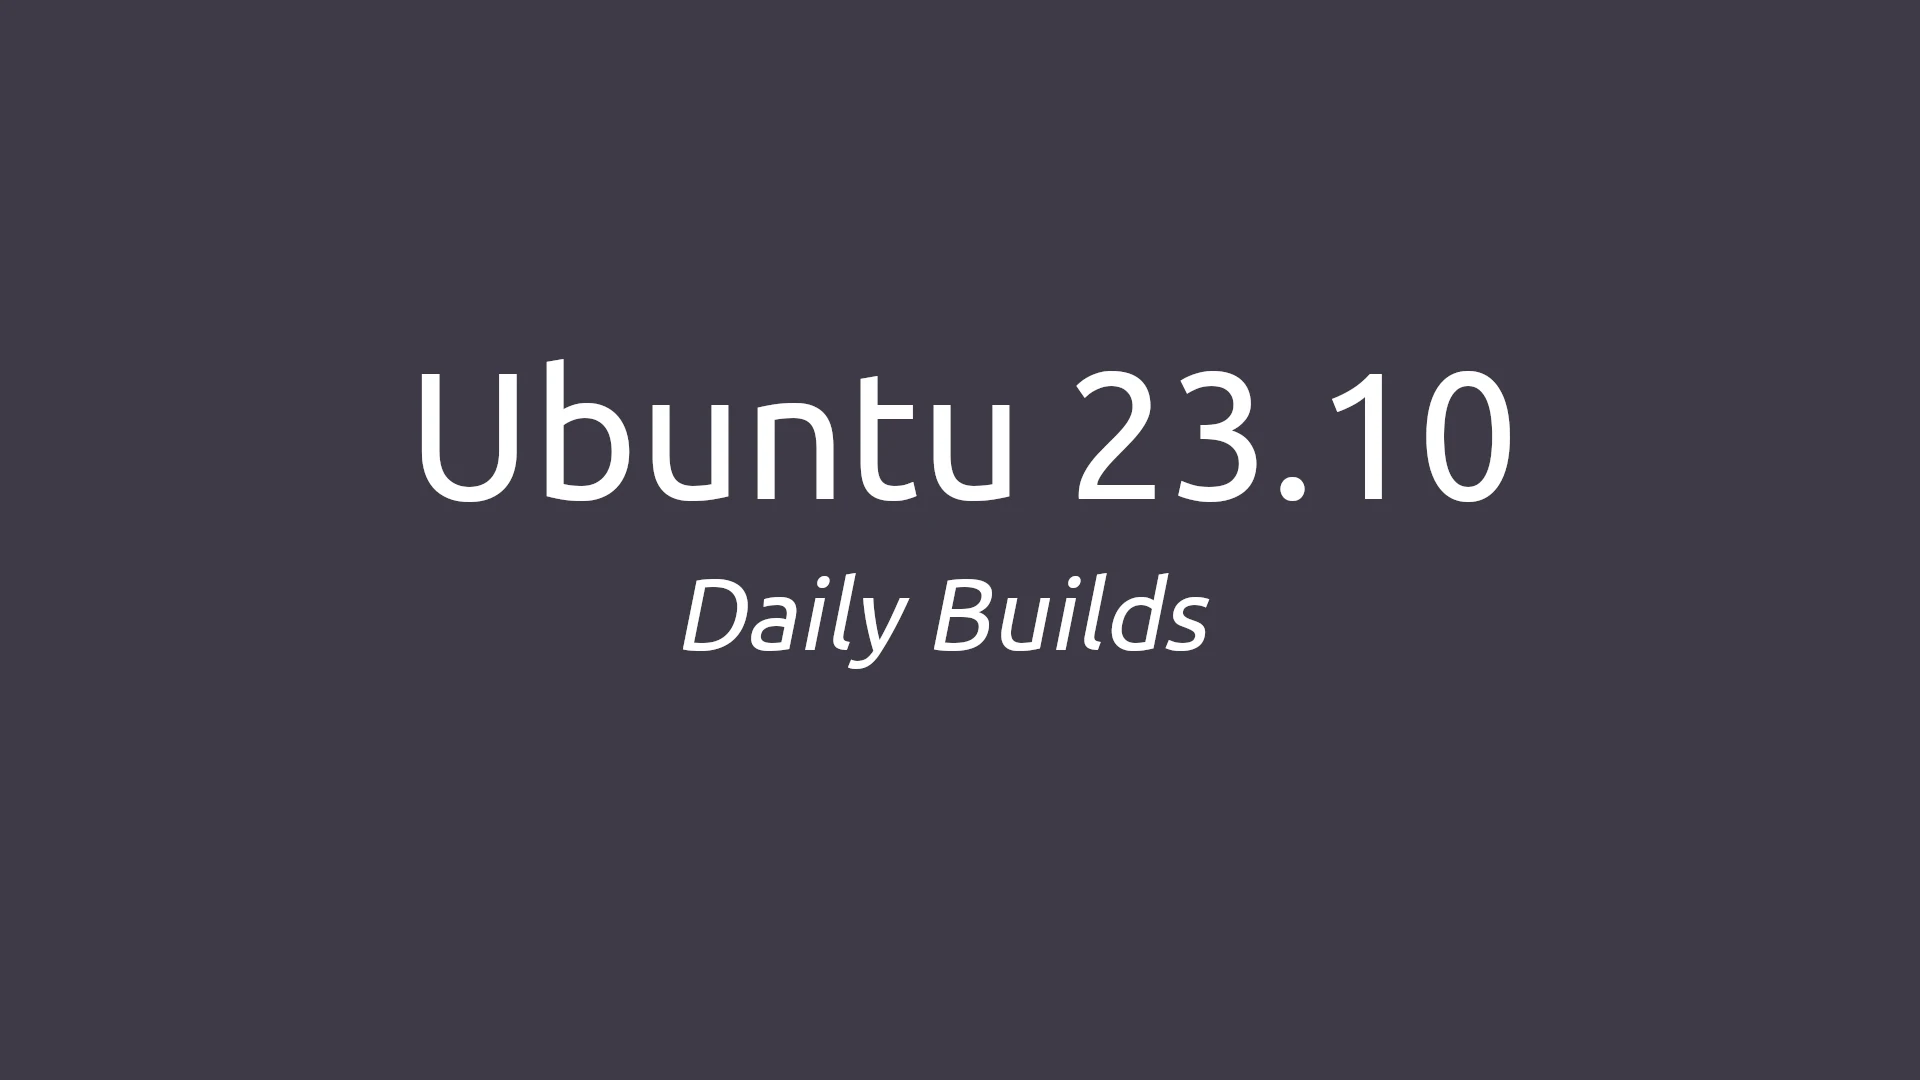 Ubuntu 23.10 (Mantic Minotaur) Daily Build ISOs Are Now Available for Download